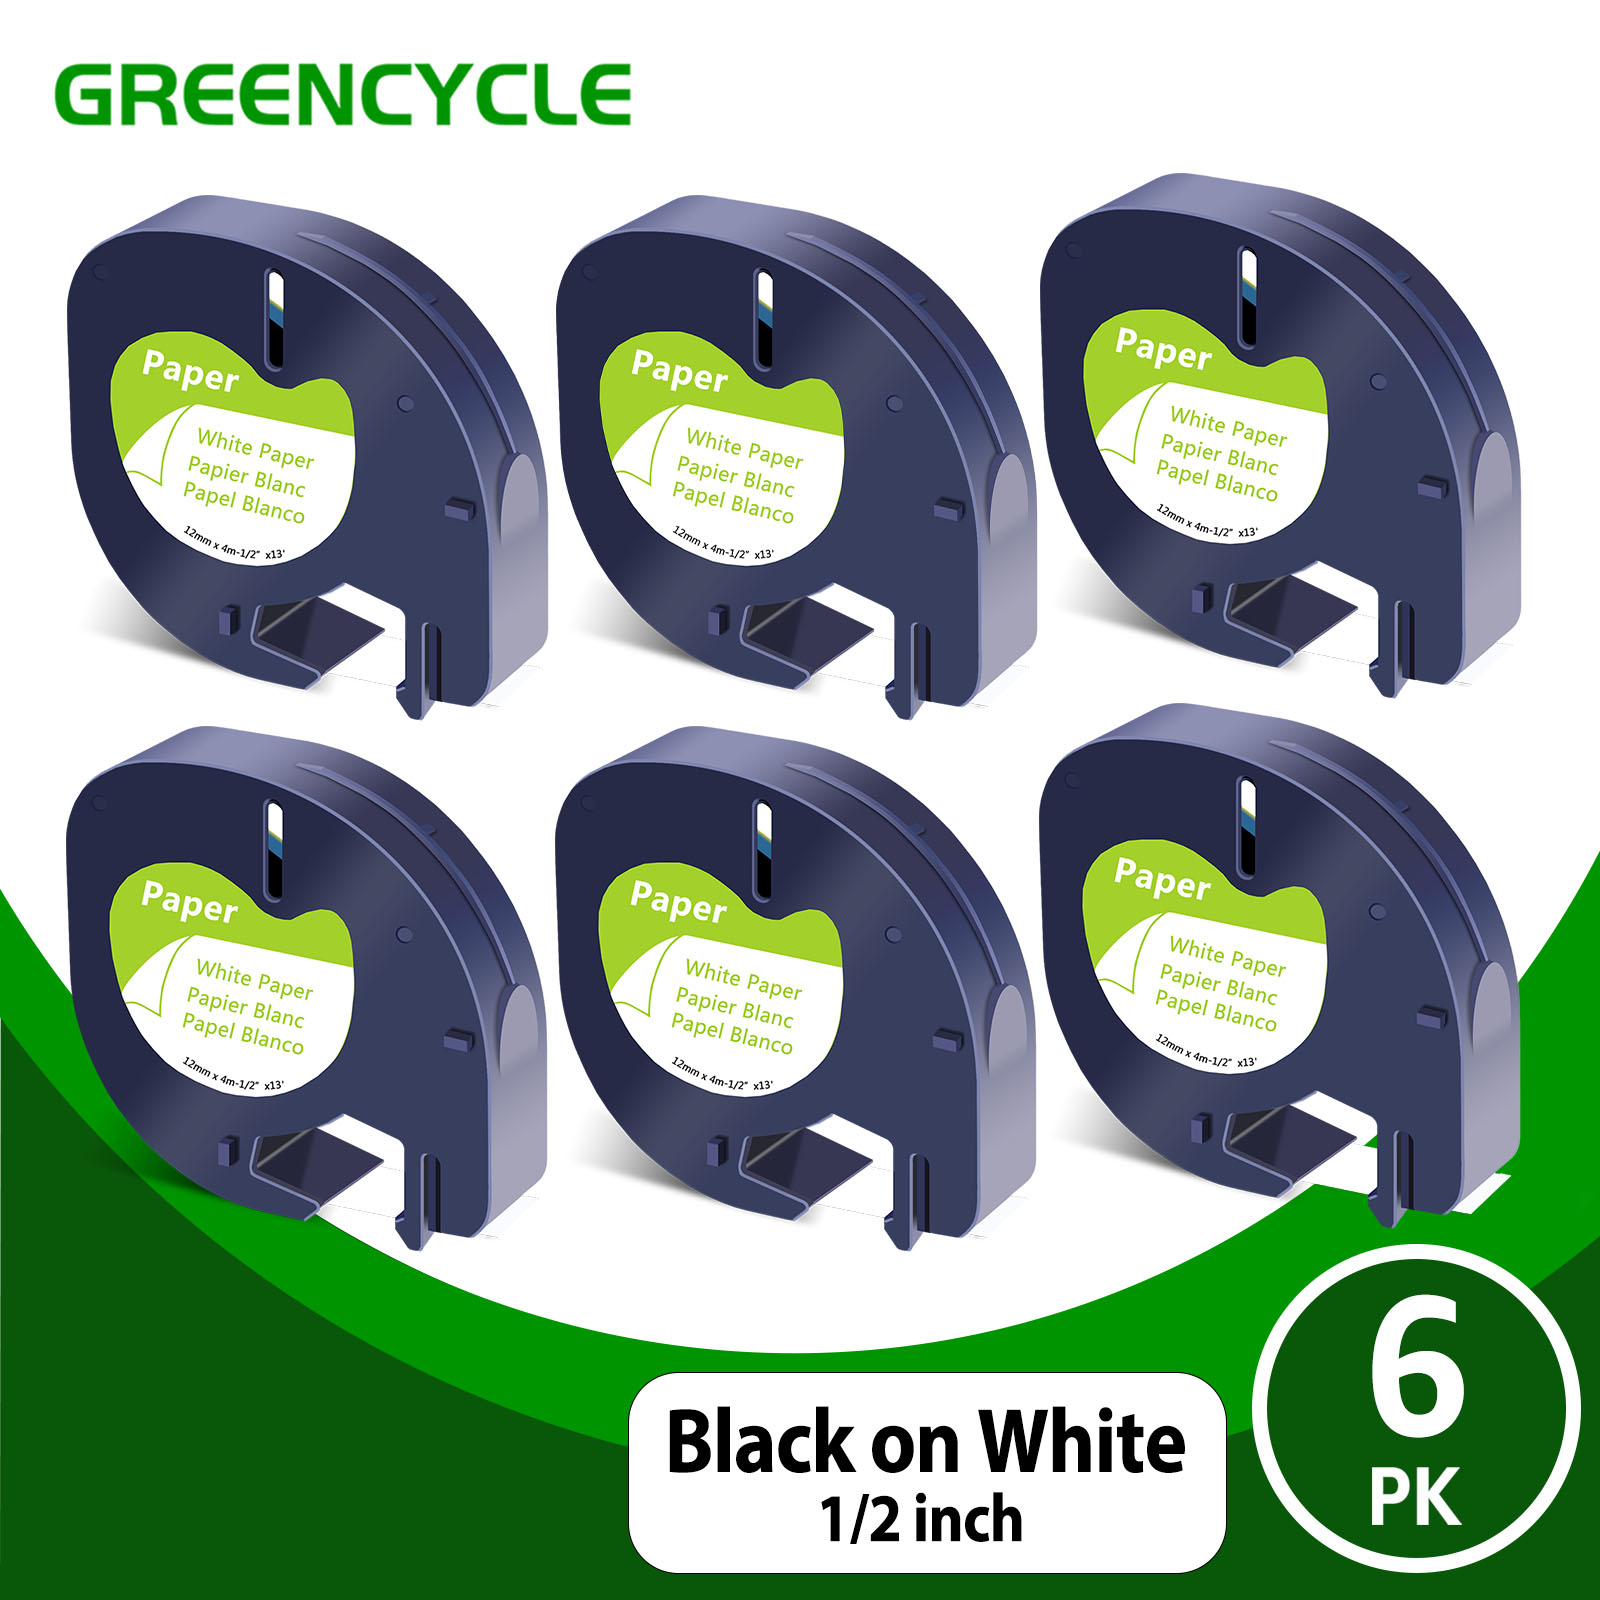 GREENCYCLE 6PK 1/2" 12mm Black on White Paper Refills Compatible for Dymo 91330 59421 S0721510 LetraTag Labels Tape - image 1 of 6